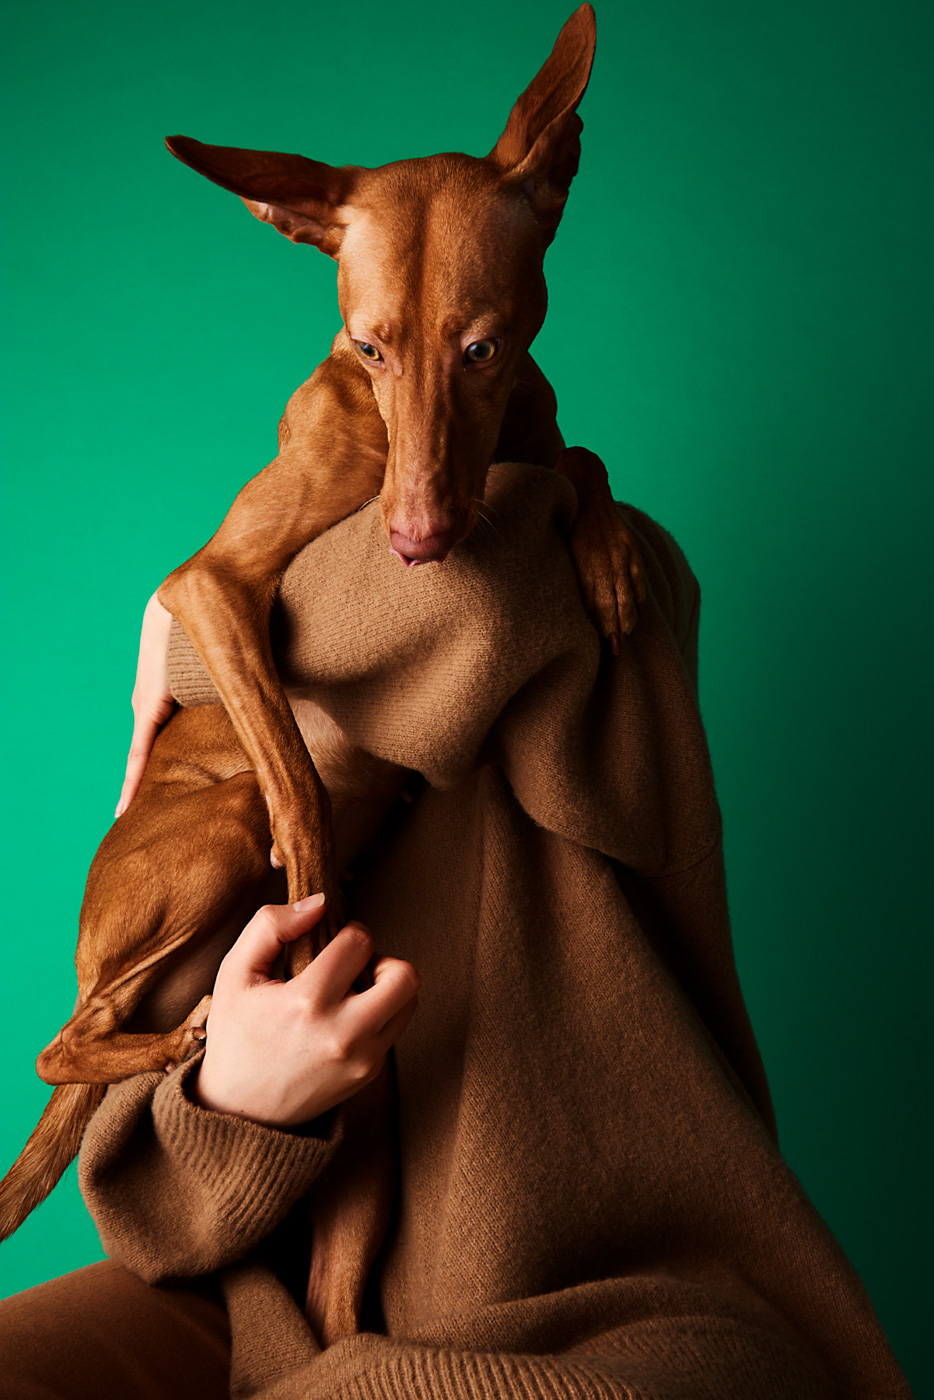 Funny_portrait_of_owner_and_Cirneco_dell'etna_dog_with_orange_fur_on_green_background_photographed_by_Sara_Lehtomaa